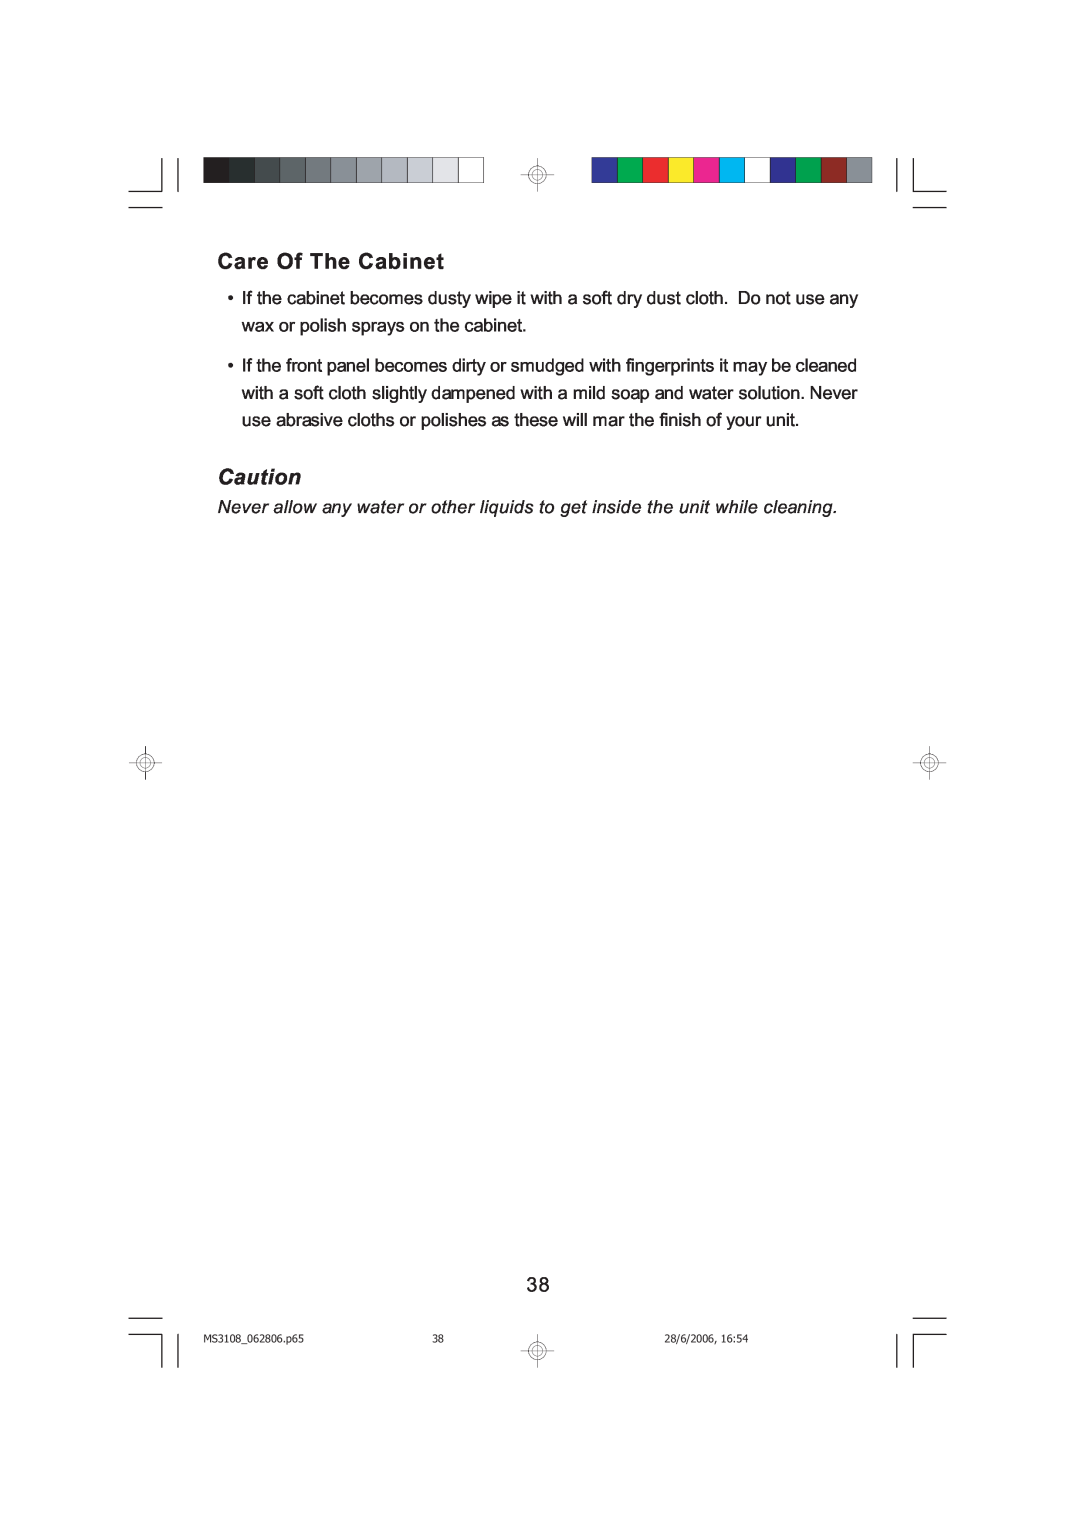 Emerson MS3108C owner manual Care Of The Cabinet, MS3108 062806.p6538, 28/6/2006 